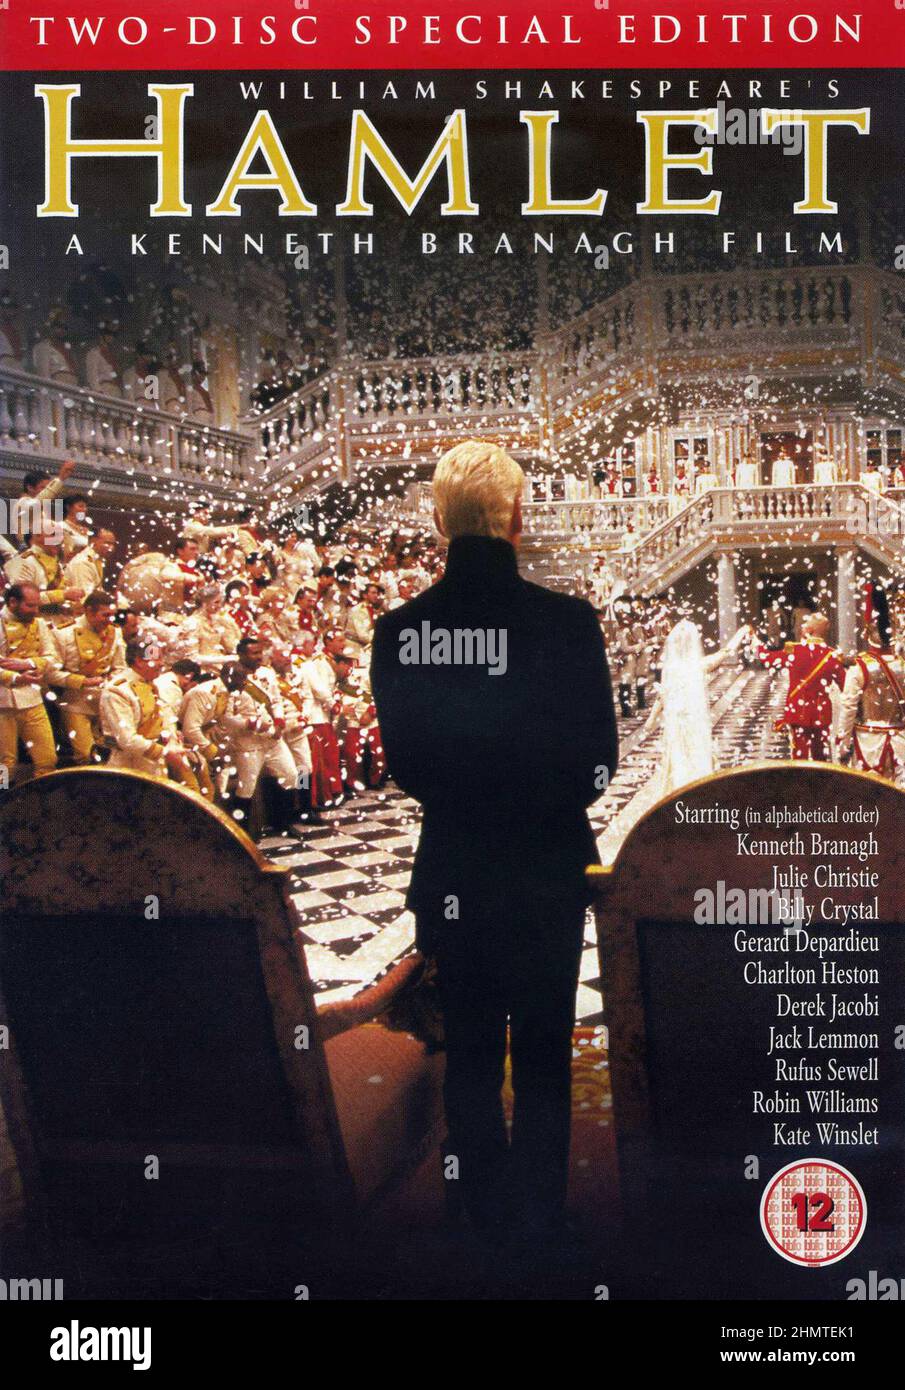 DVD Cover. 'Hamlet' by William Shakespeare. Stock Photo